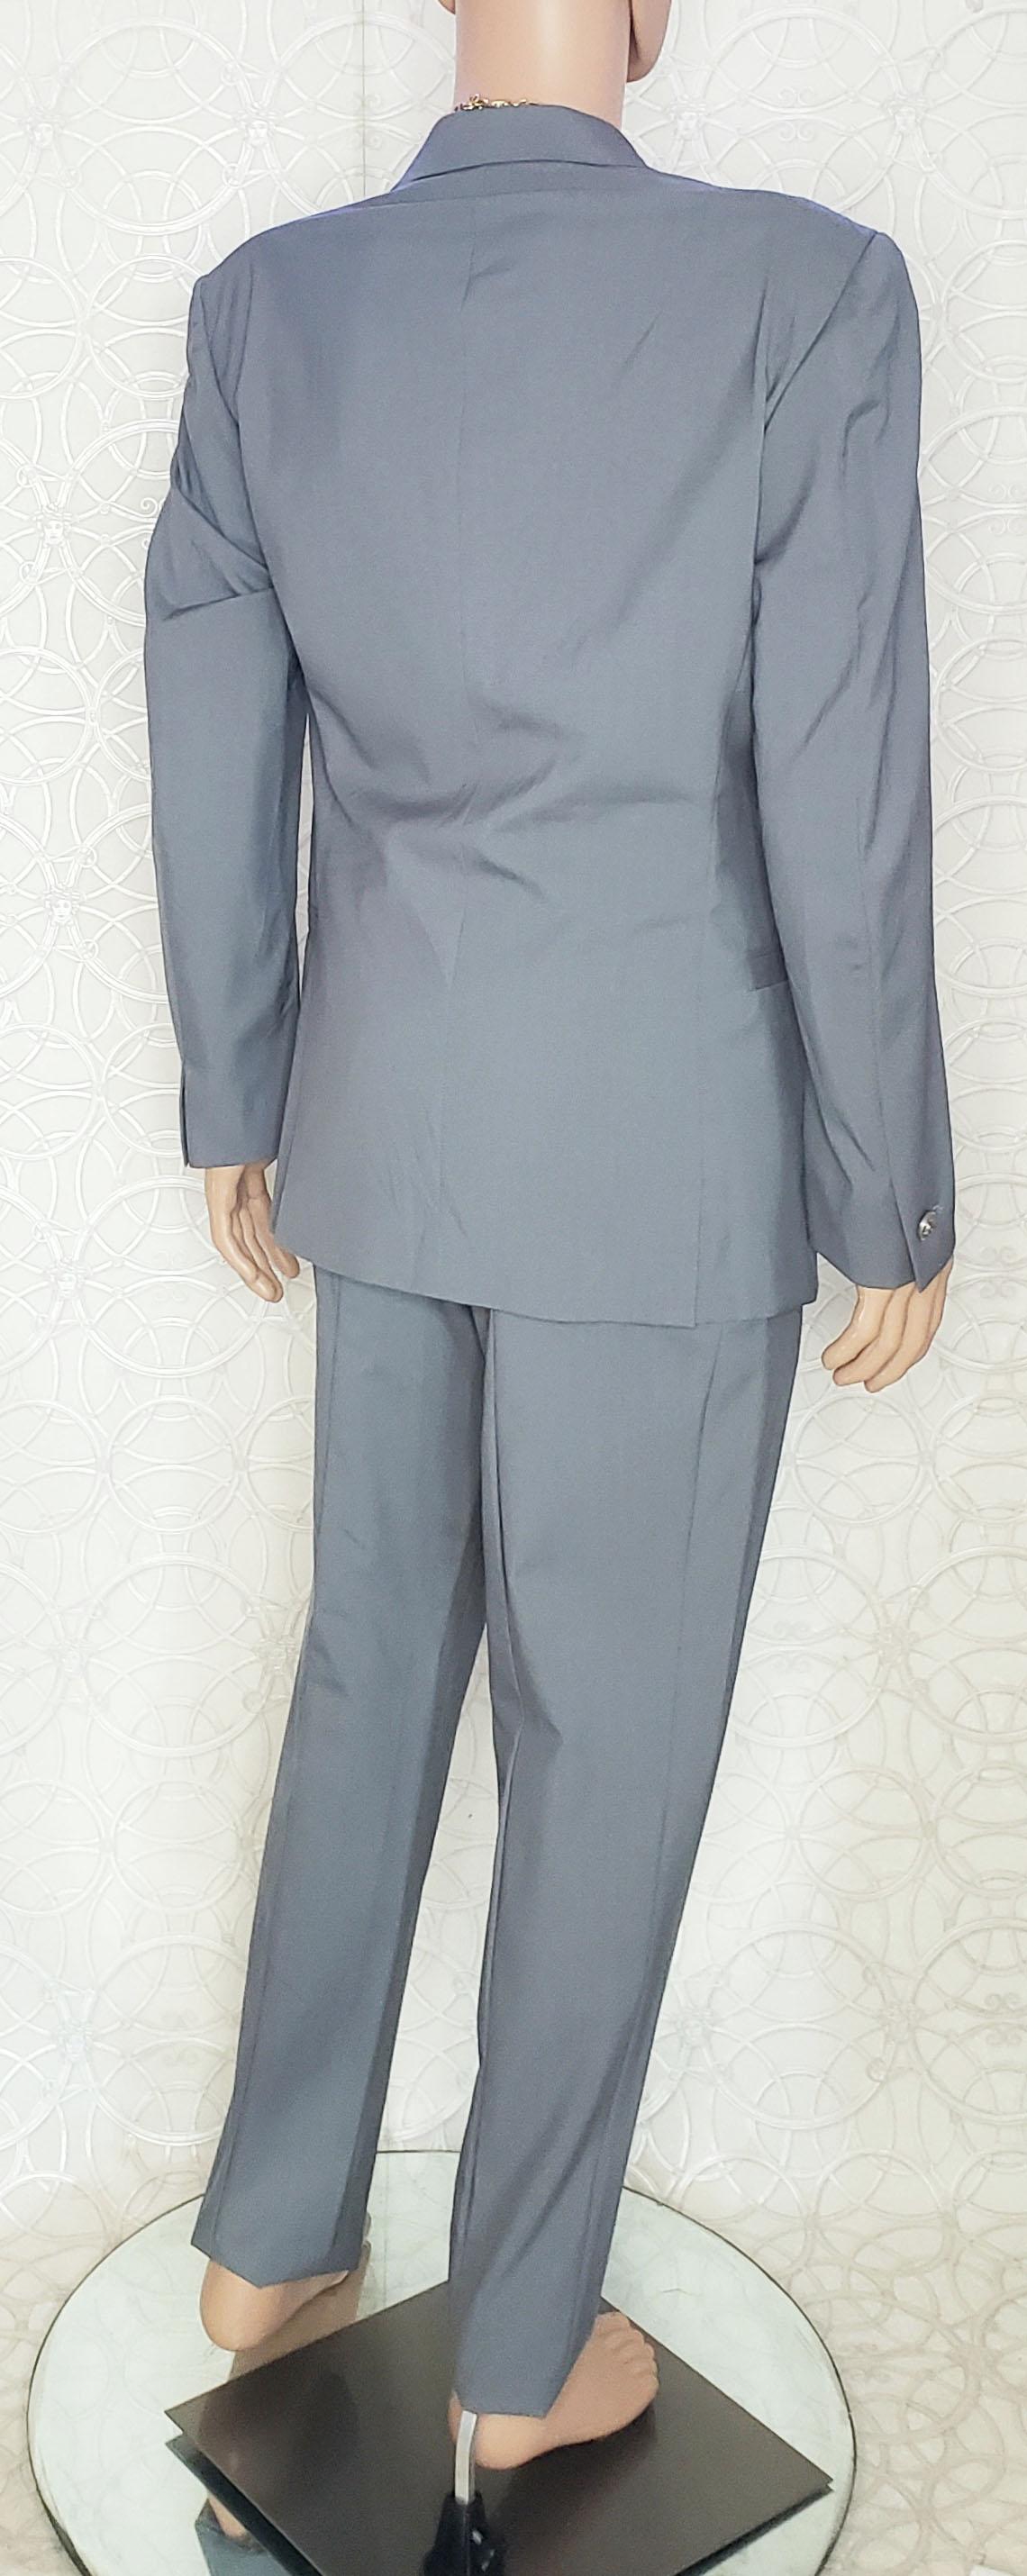 VERSACE S/S 2012 look # 30 BRAND NEW GRAY SUIT 48 - 38 (M) For Sale 2